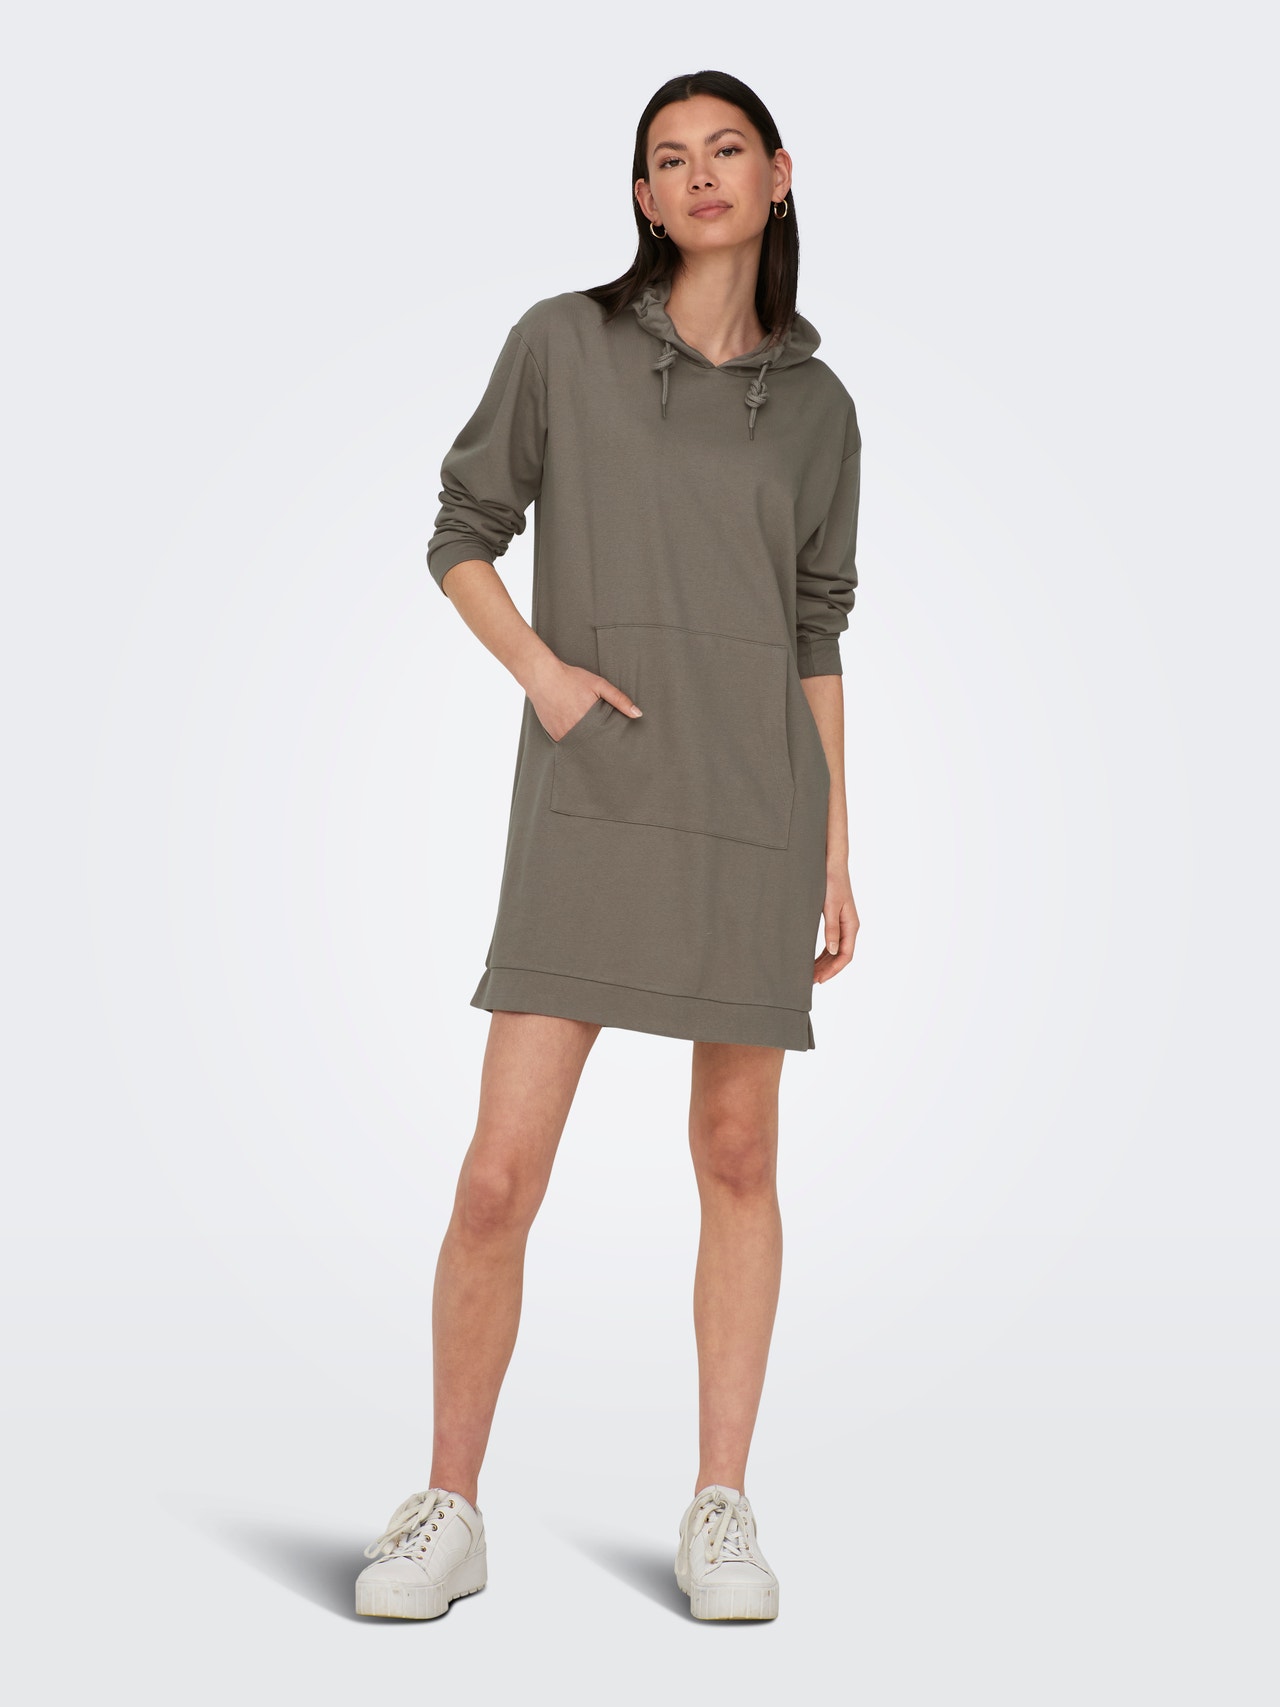 ONLY Sweat dress with o-neck -Driftwood - 15300623